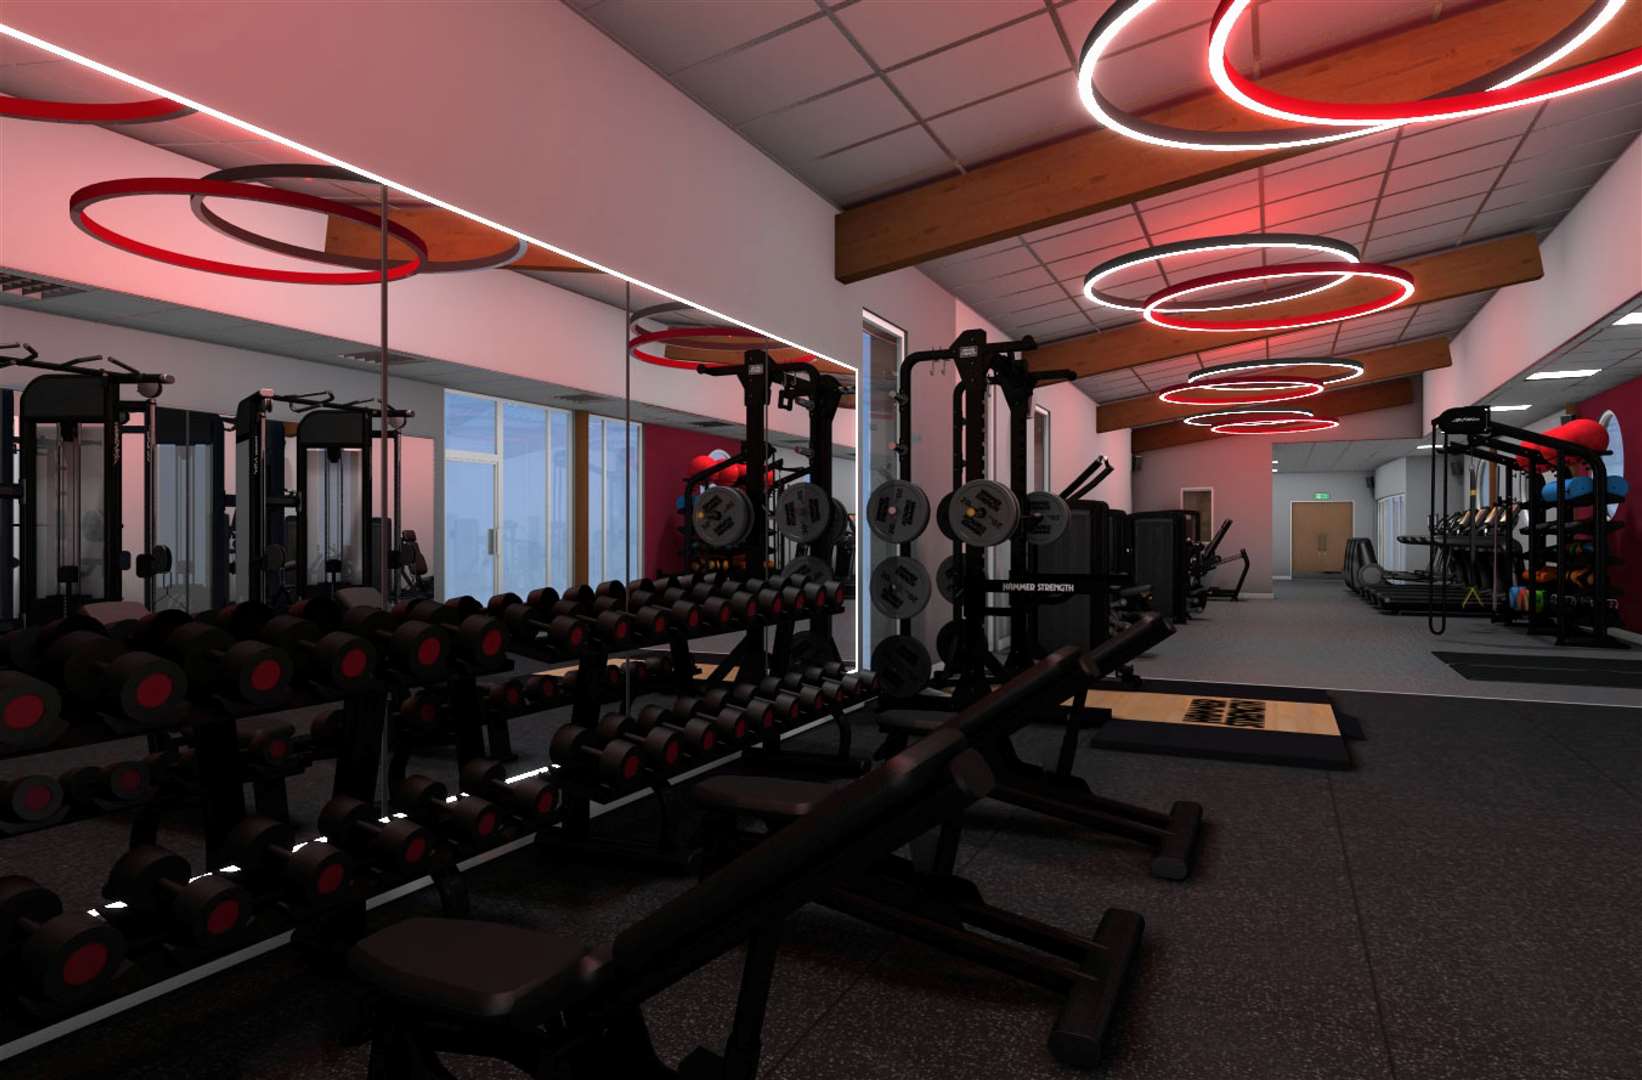 CGI imagery of how the upgrades could look at the Kingsmead Leisure Centre in Canterbury